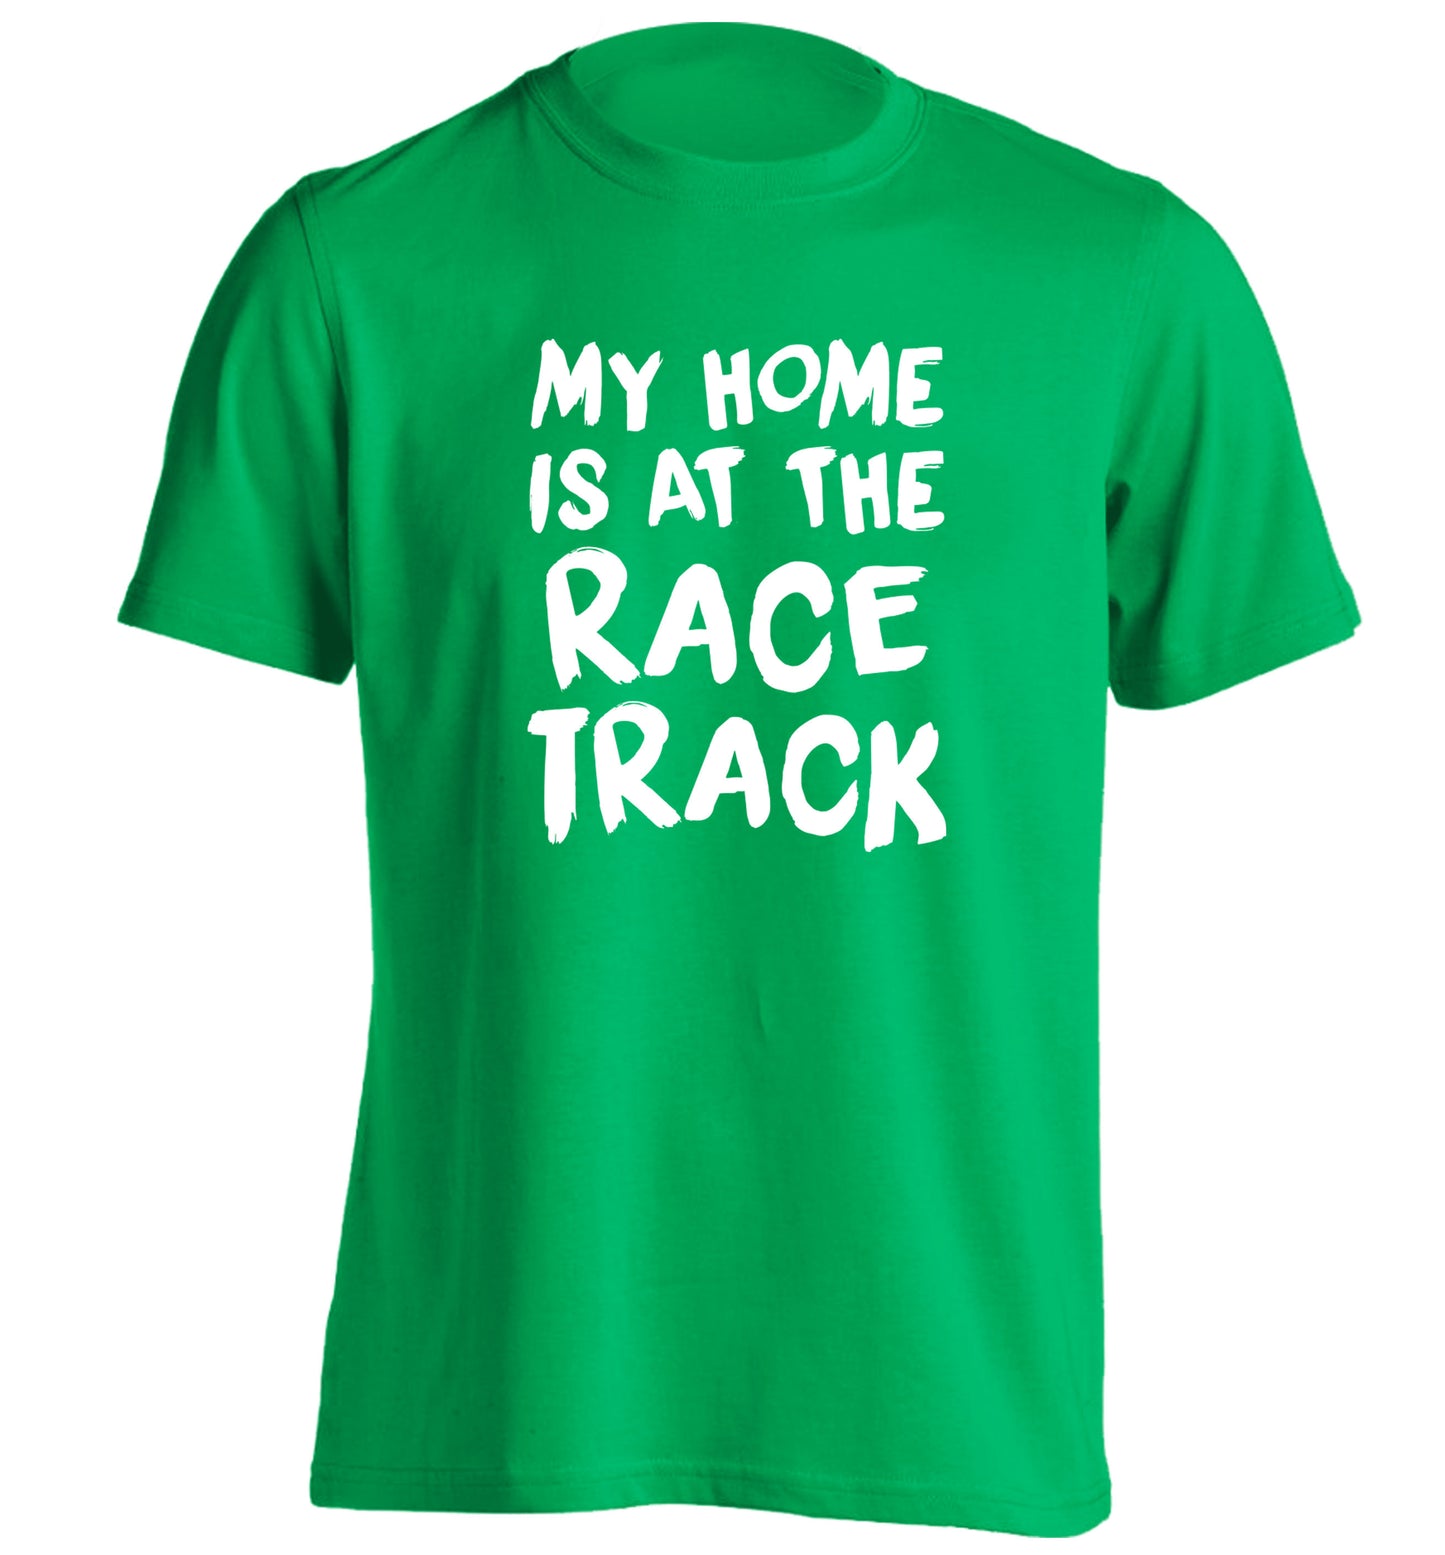 My home is at the race track adults unisex green Tshirt 2XL